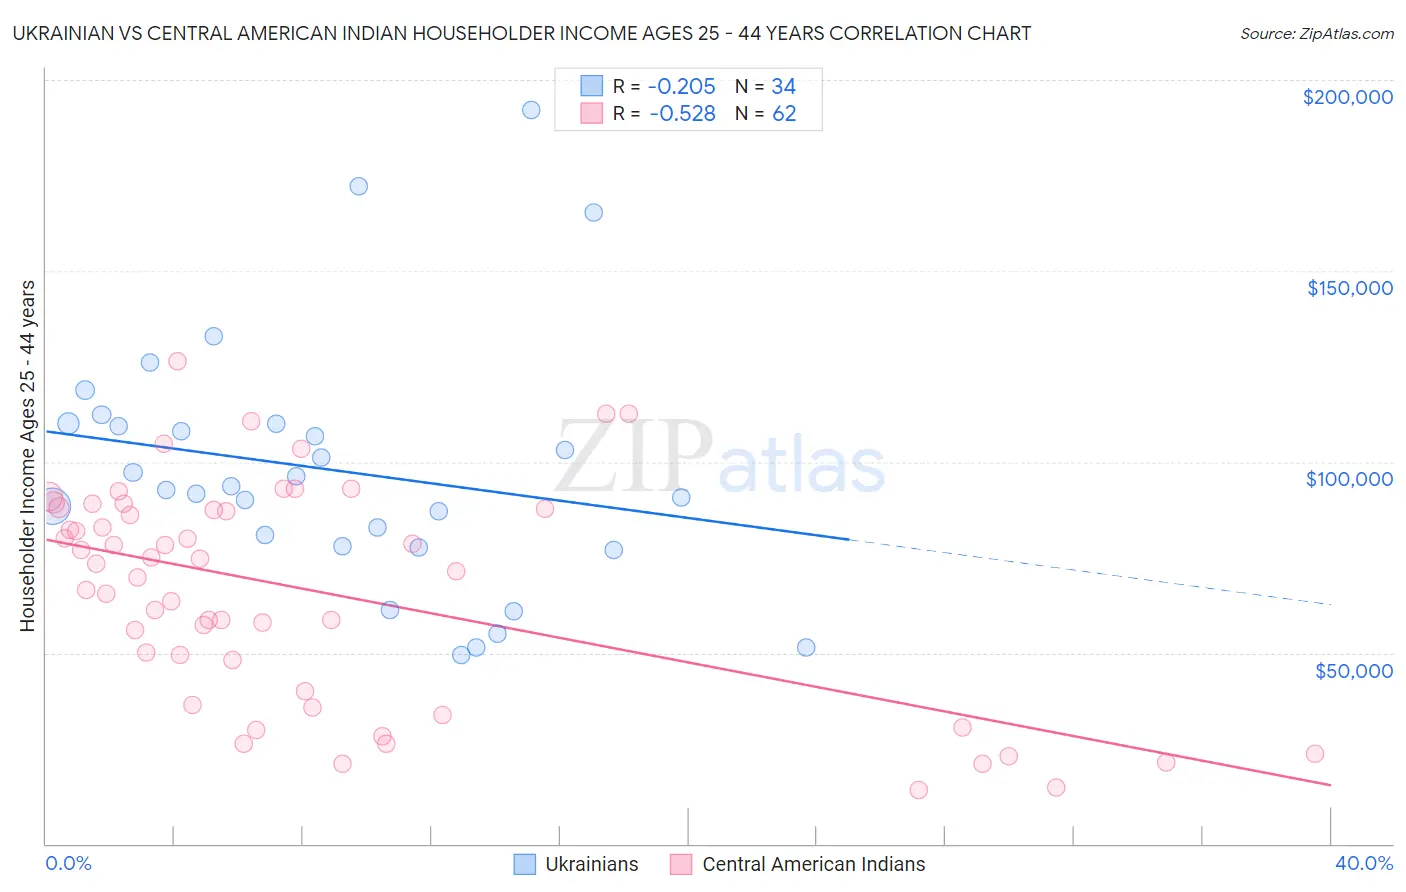 Ukrainian vs Central American Indian Householder Income Ages 25 - 44 years